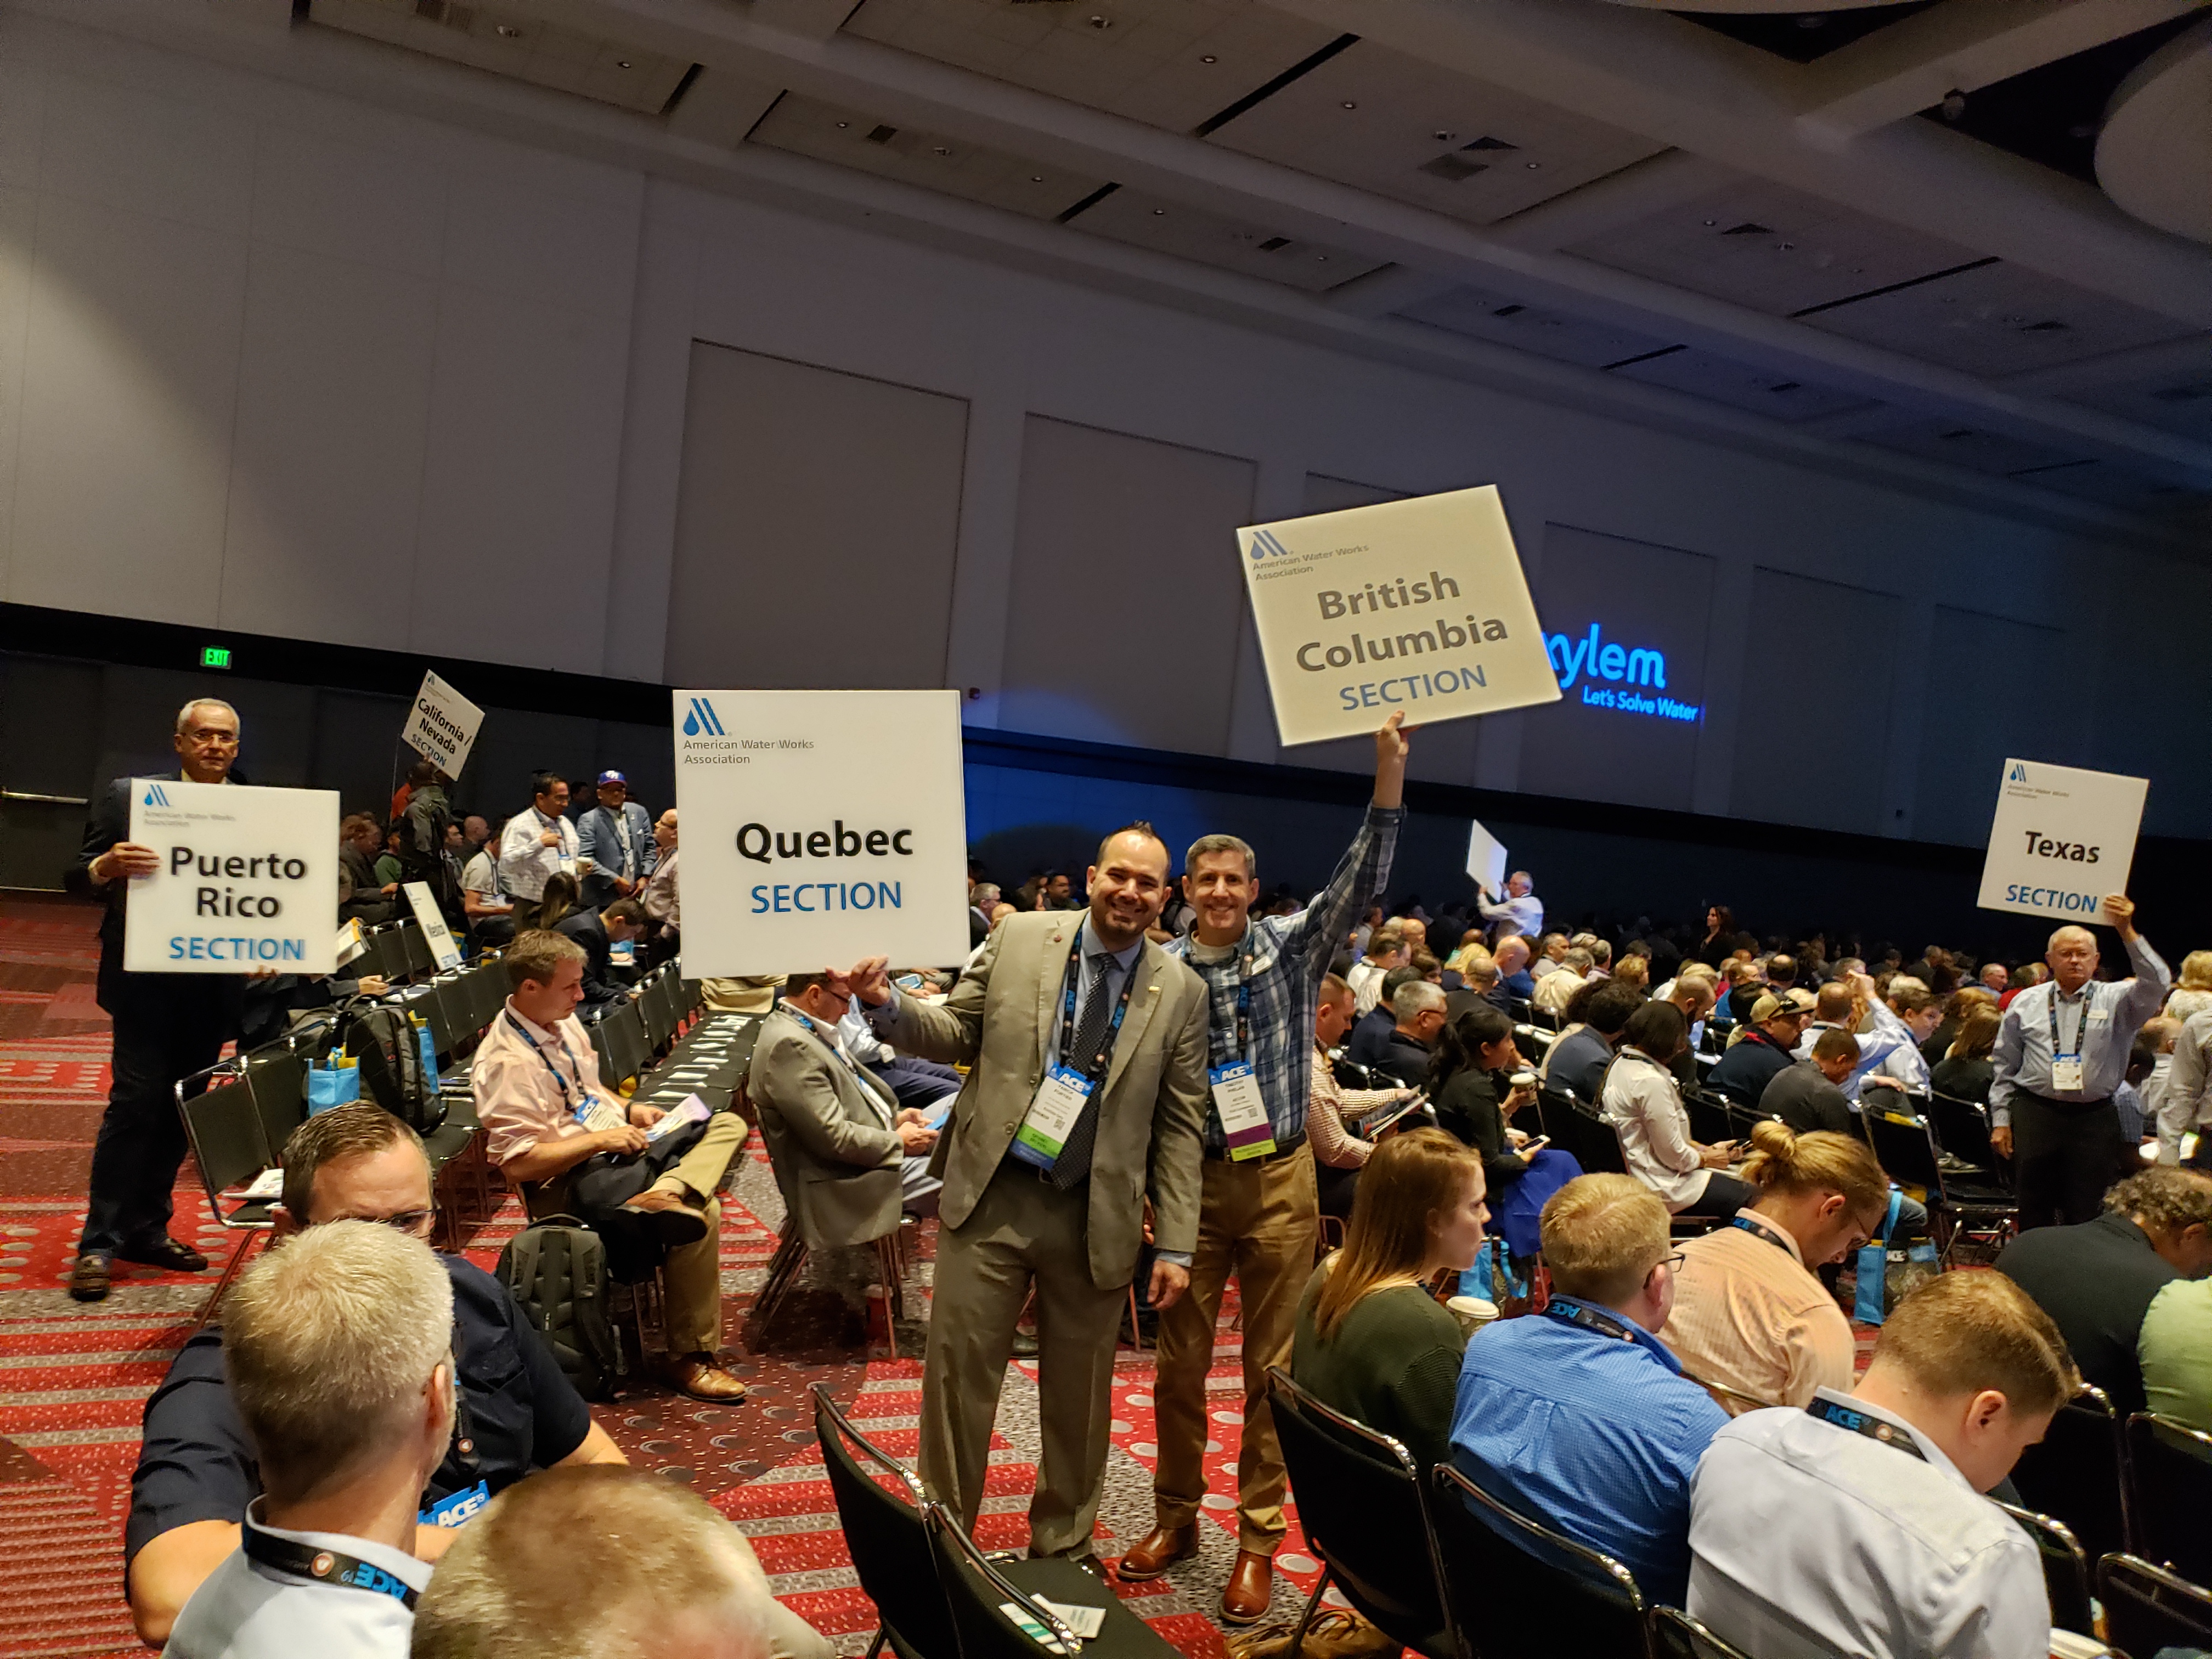 Signs for Puerto Rico, Quebec, British Columbia, Texas and California-Nevada sections of the American Water Works Association can be seen in a crowded ballroom.